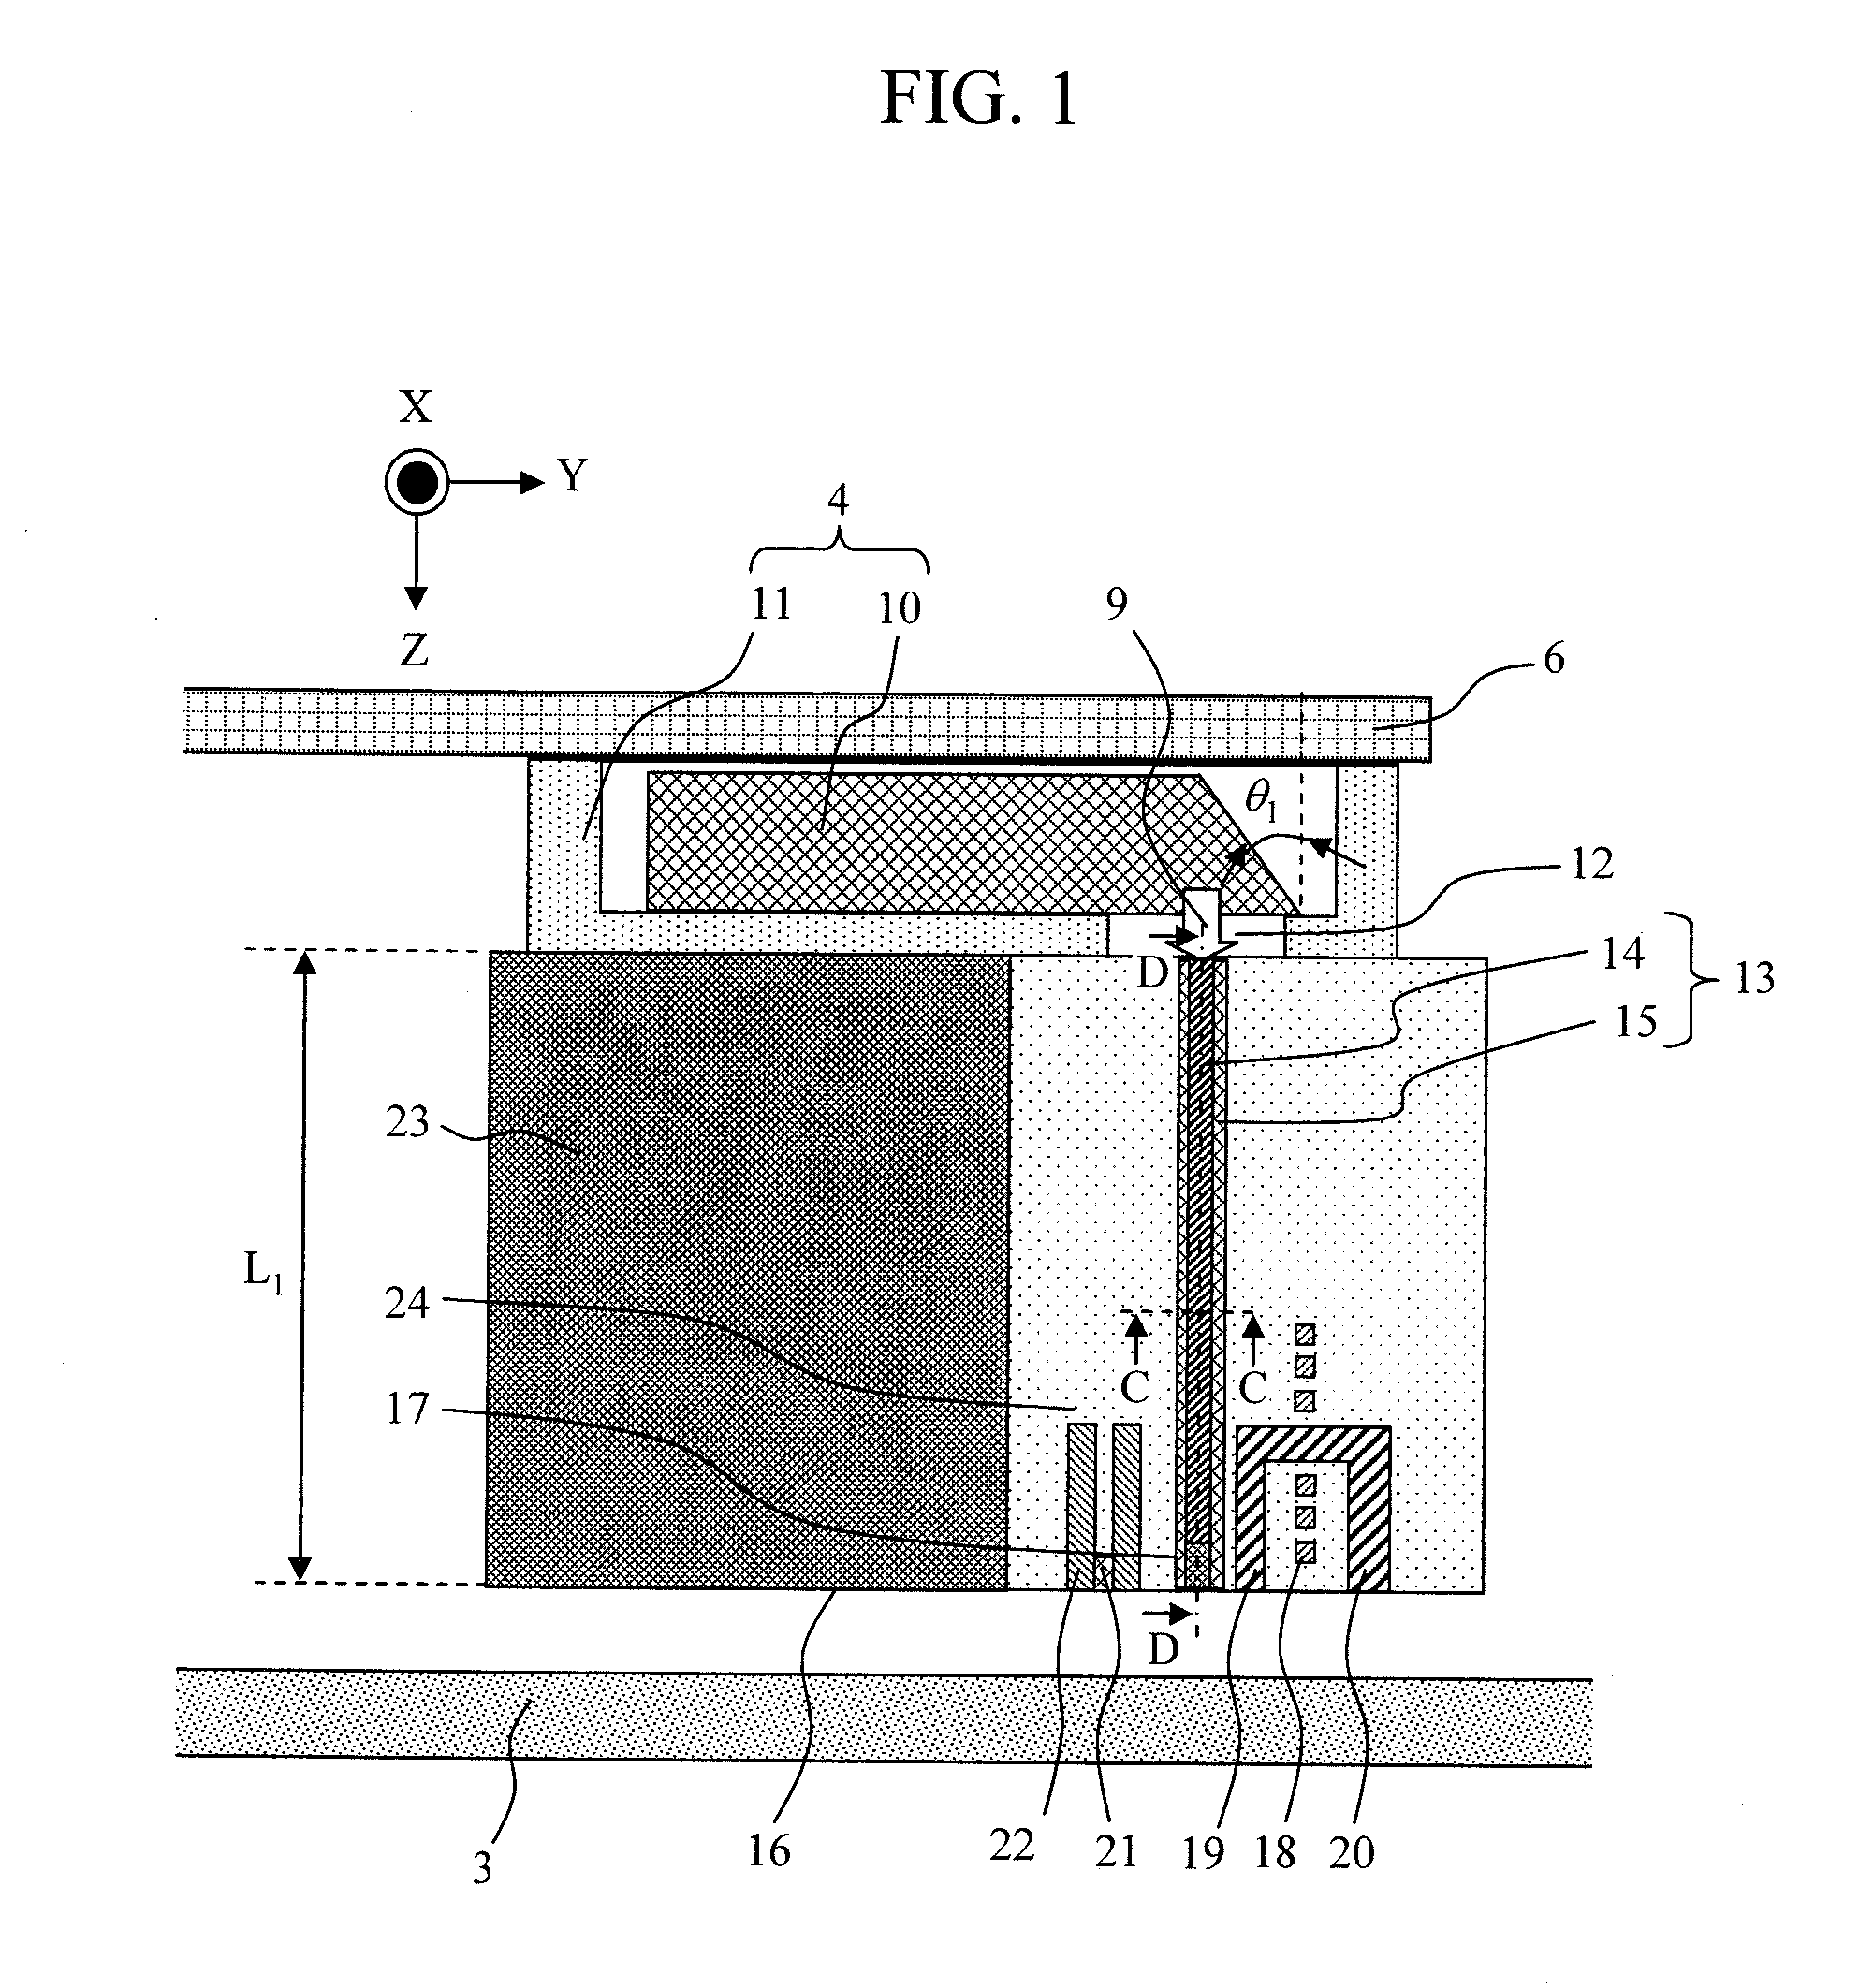 Thermal-assisted-magnetic-recording head and magnetic recording system equipped with the same